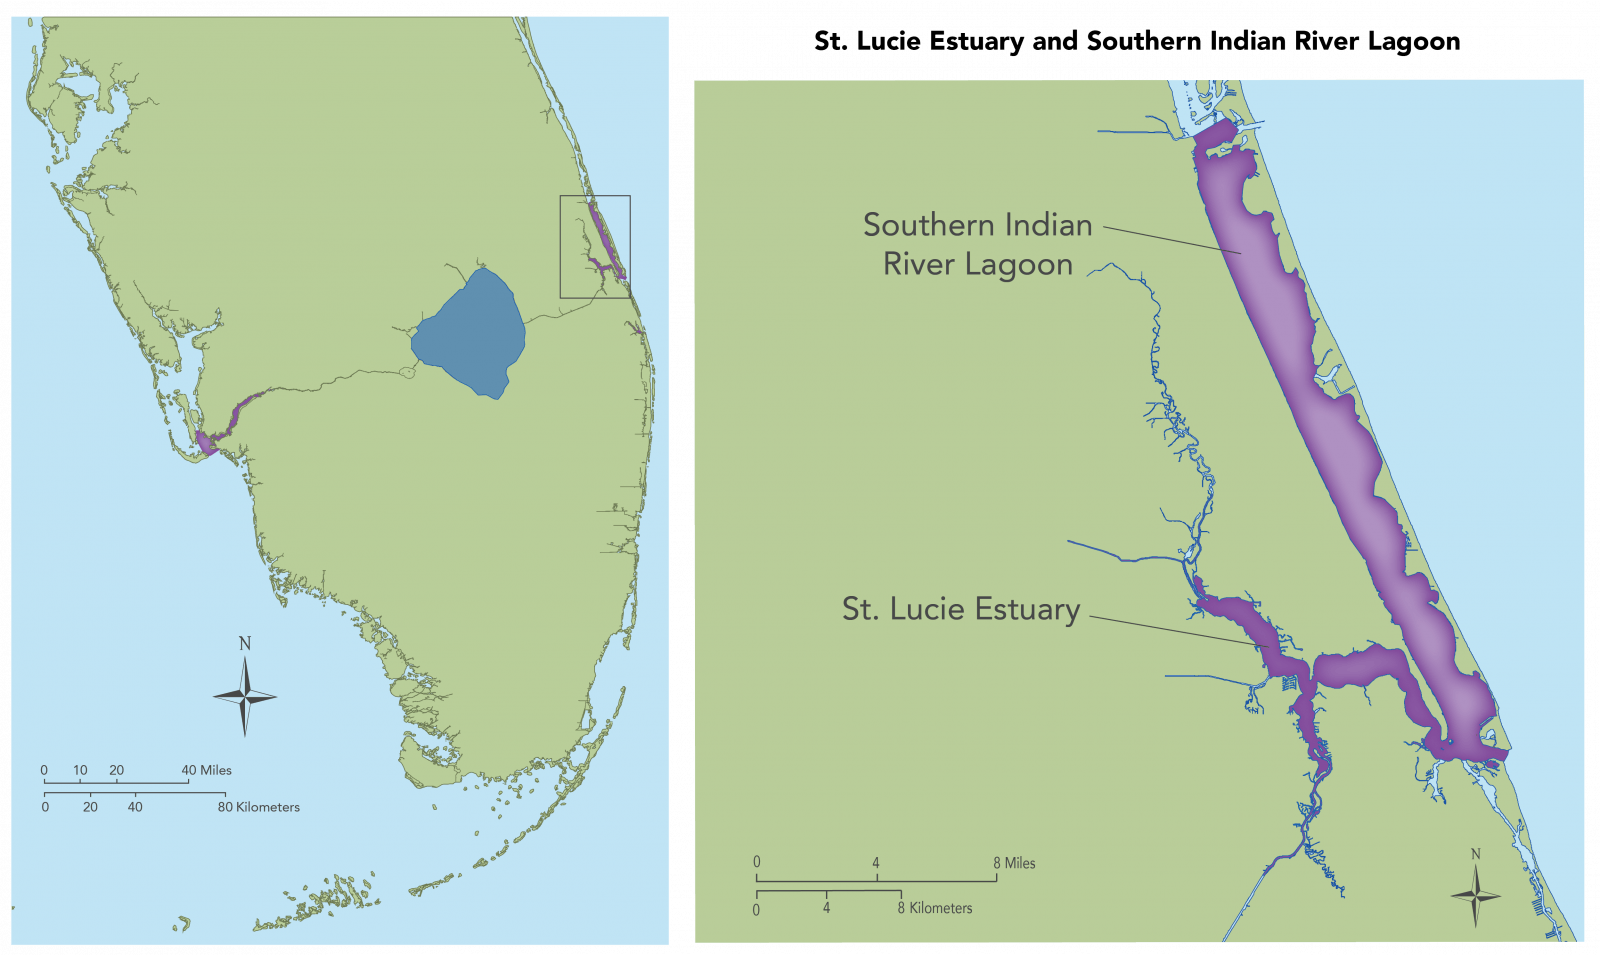 St Lucie Estuary and Southern Indian River Lagoon map showing an overview and a close up of the specific region